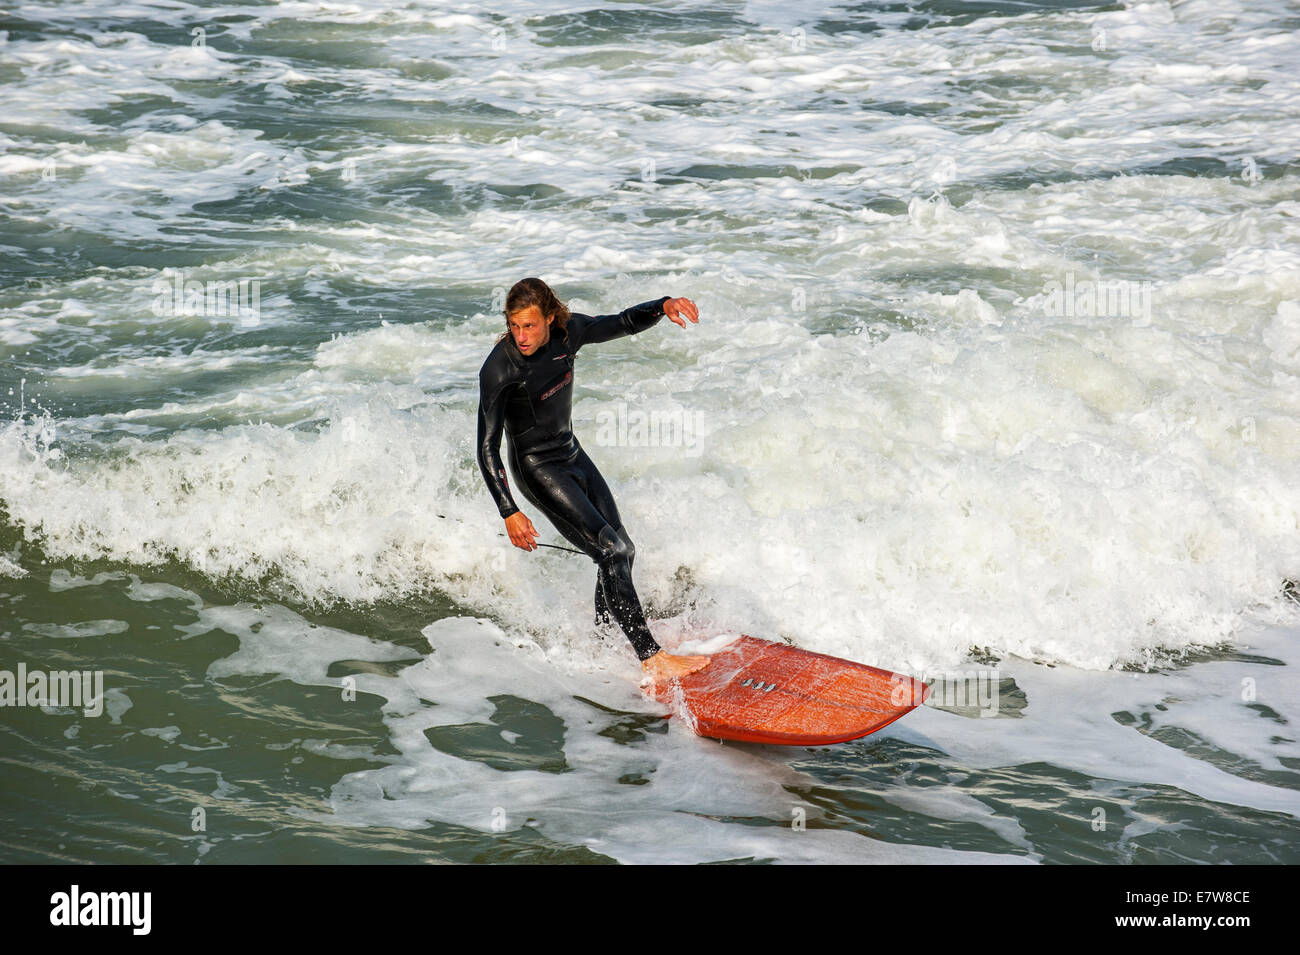 Surfer in black wetsuit riding wave on surfboard as it breaks at sea Stock Photo